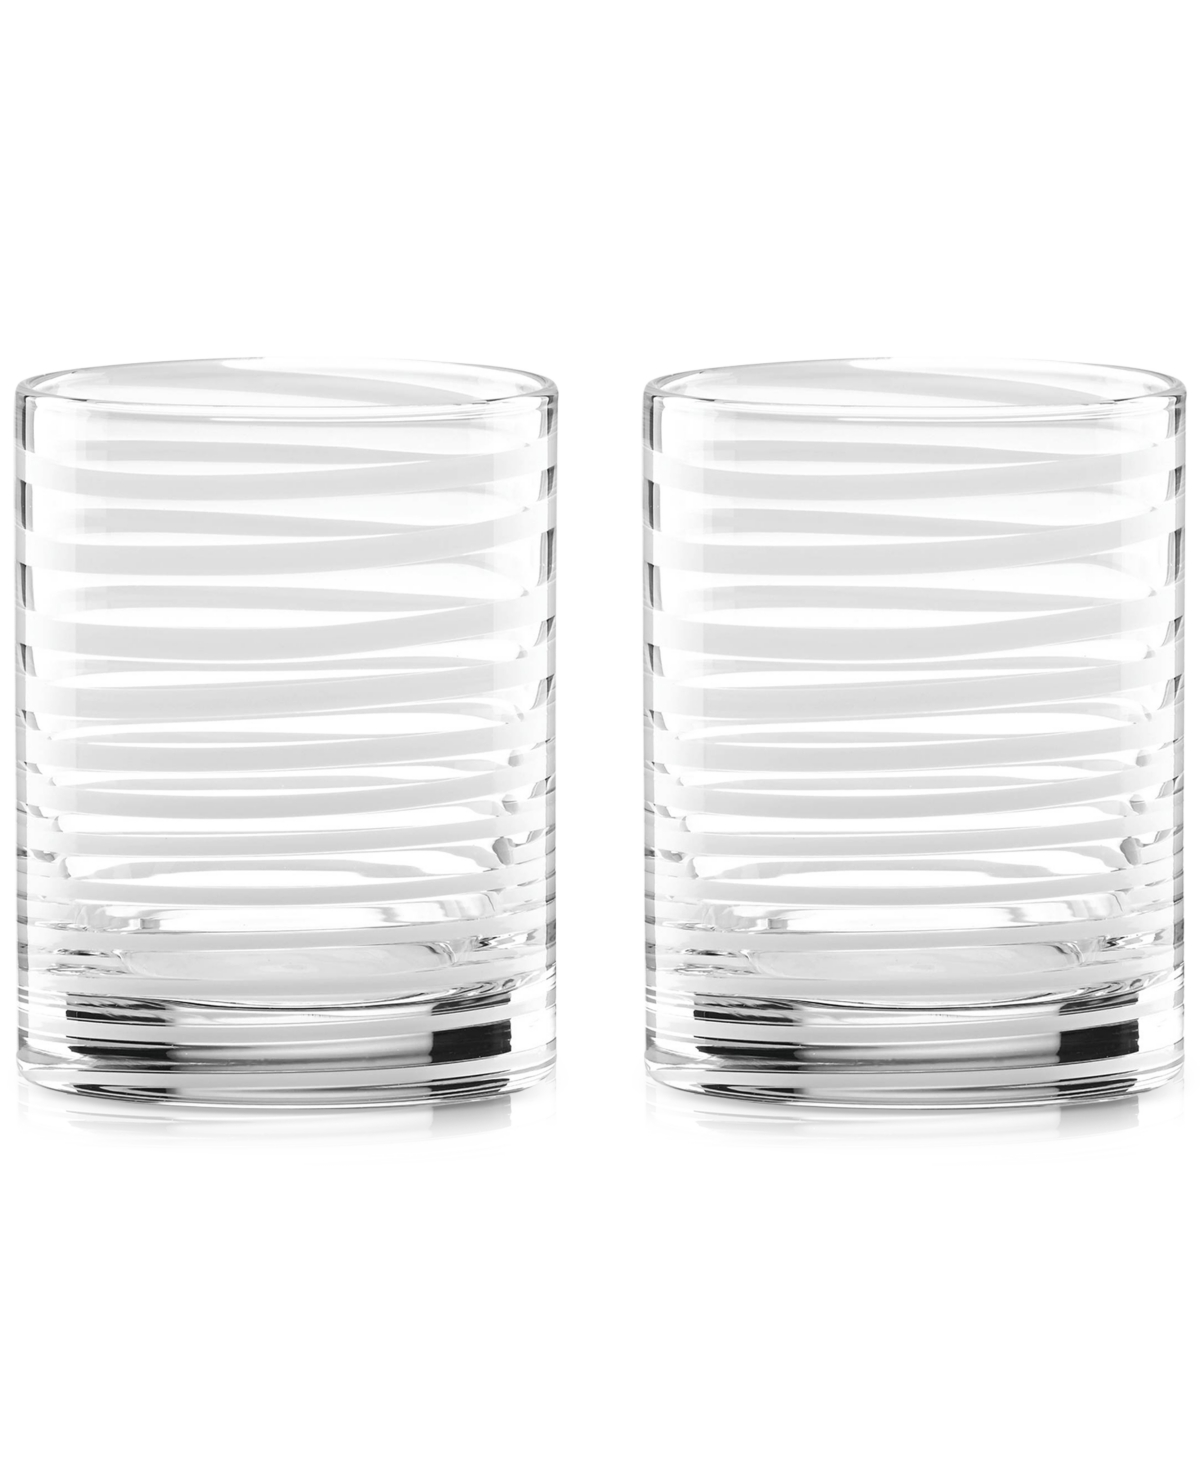 KATE SPADE KATE SPADE NEW YORK CHARLOTTE STREET DOUBLE OLD-FASHIONED GLASSES, SET OF 2